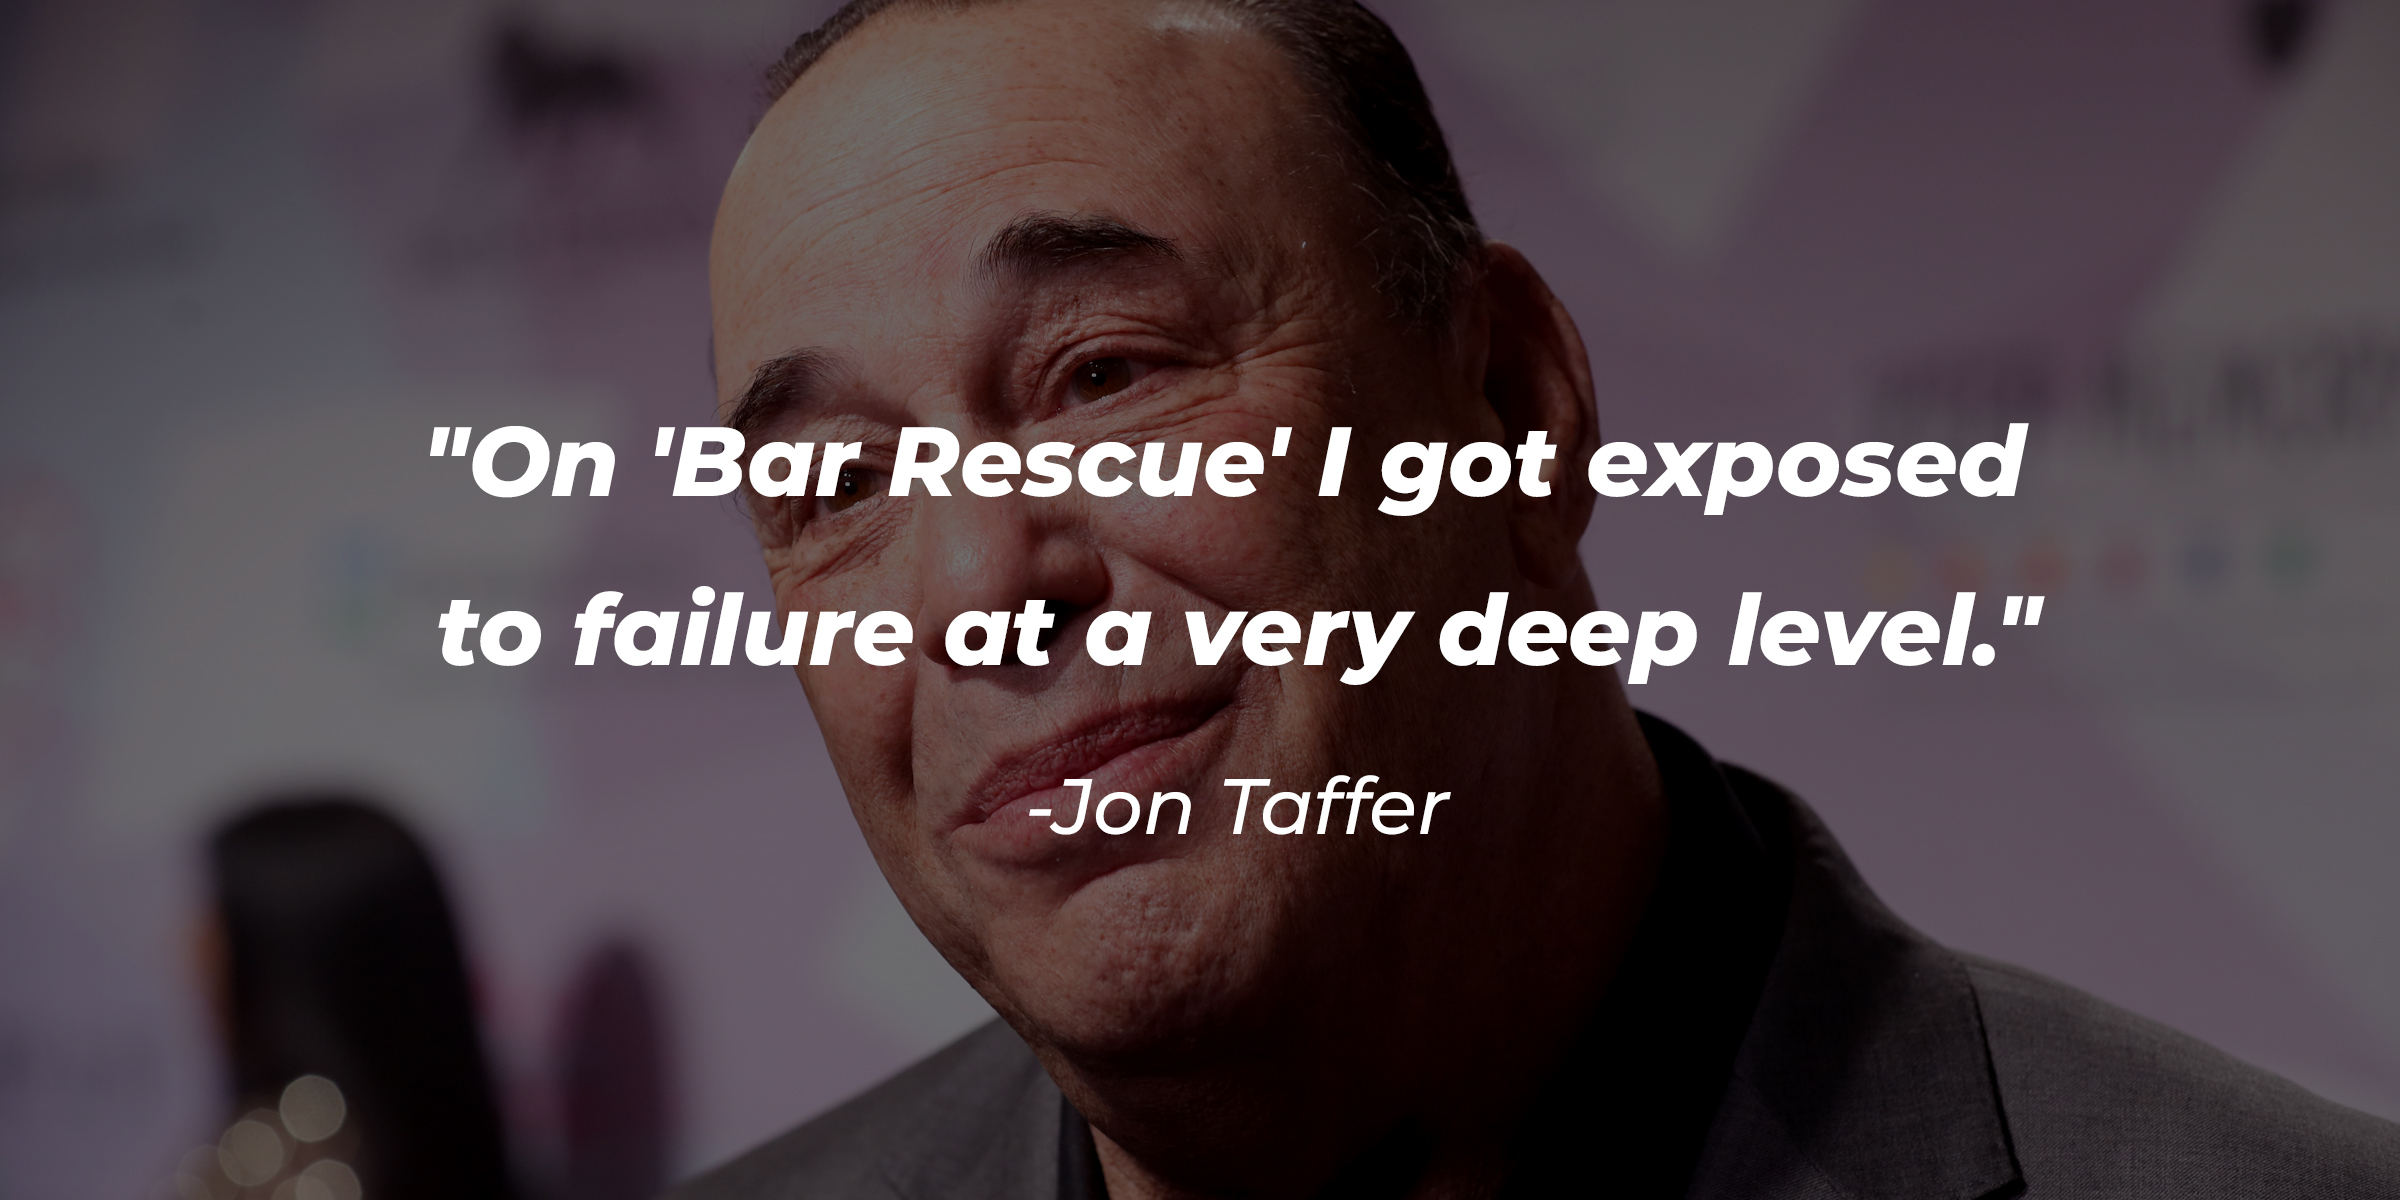 Jon Taffer's quote, 'On Bar Rescue' I got exposed to failure at a very deep level." | Source: Getty Images